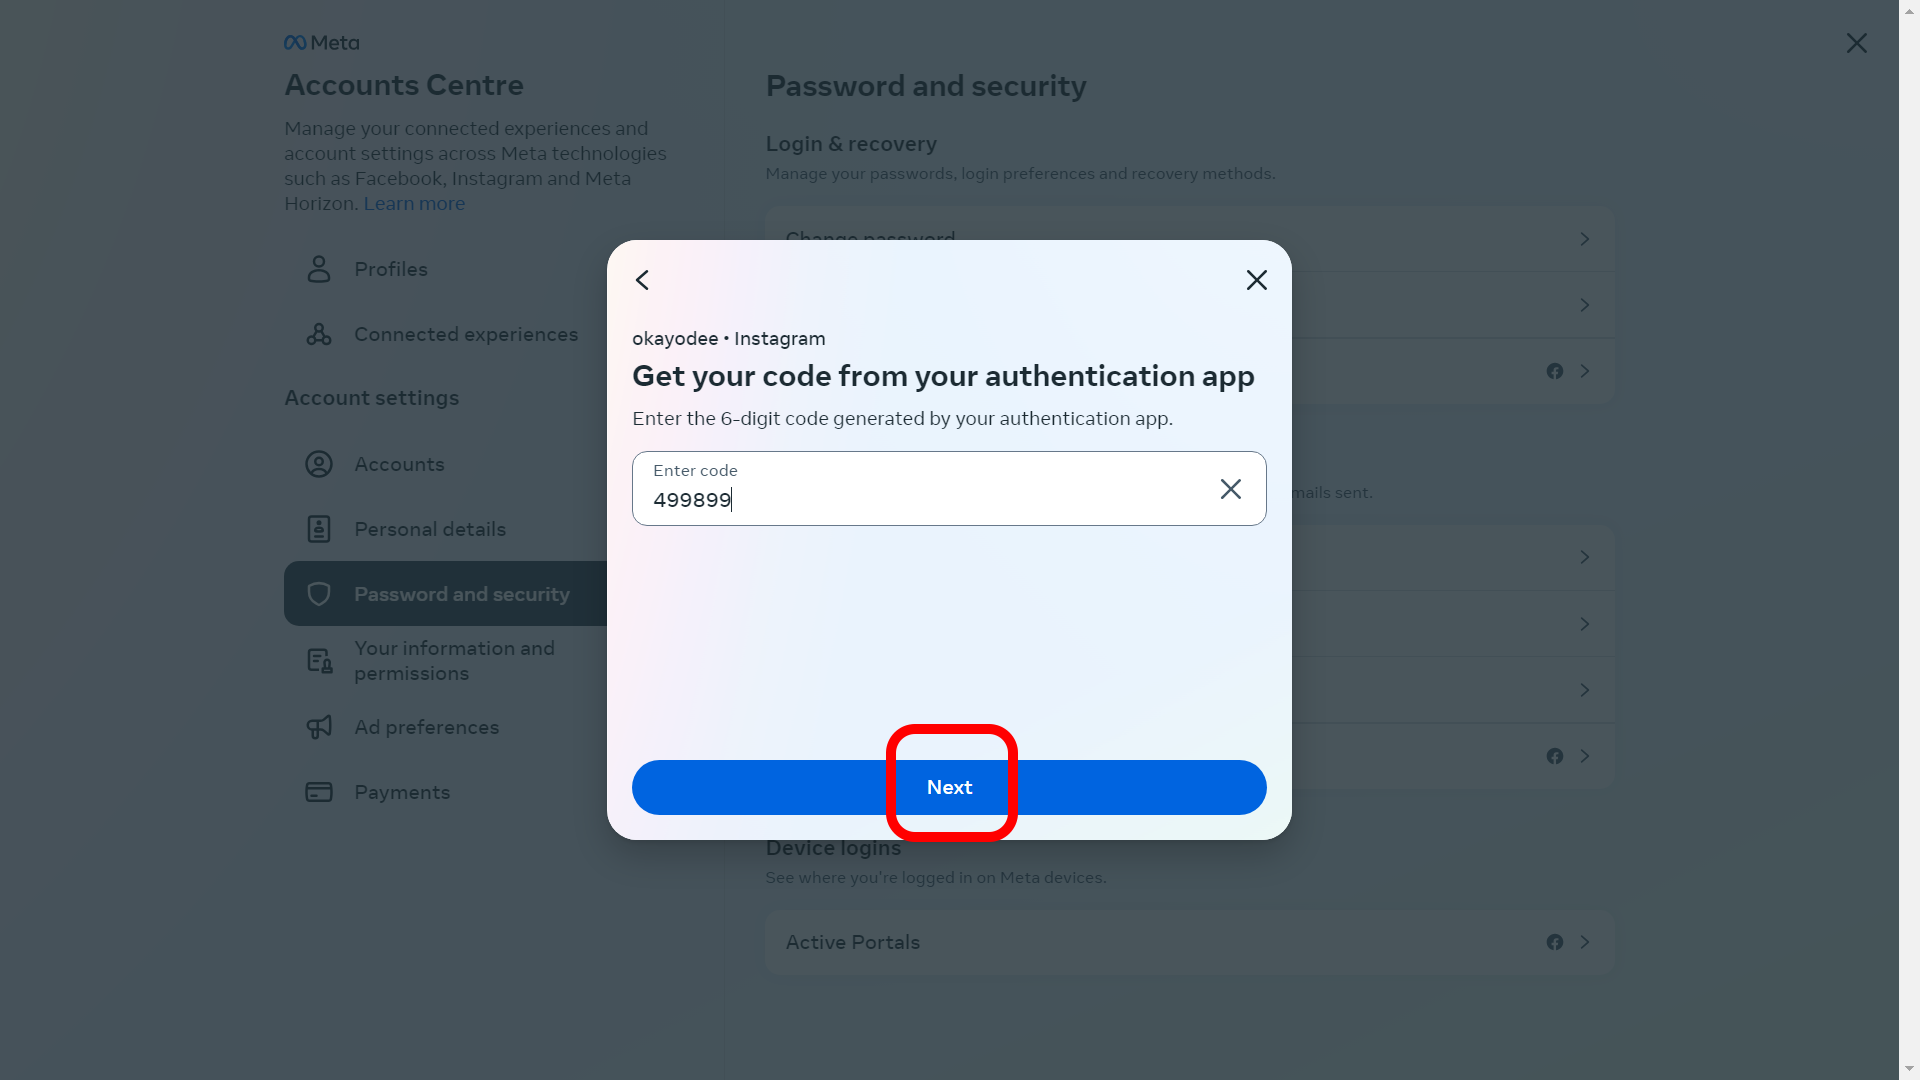 The Get. your code from your authentication app highlighting the Next button